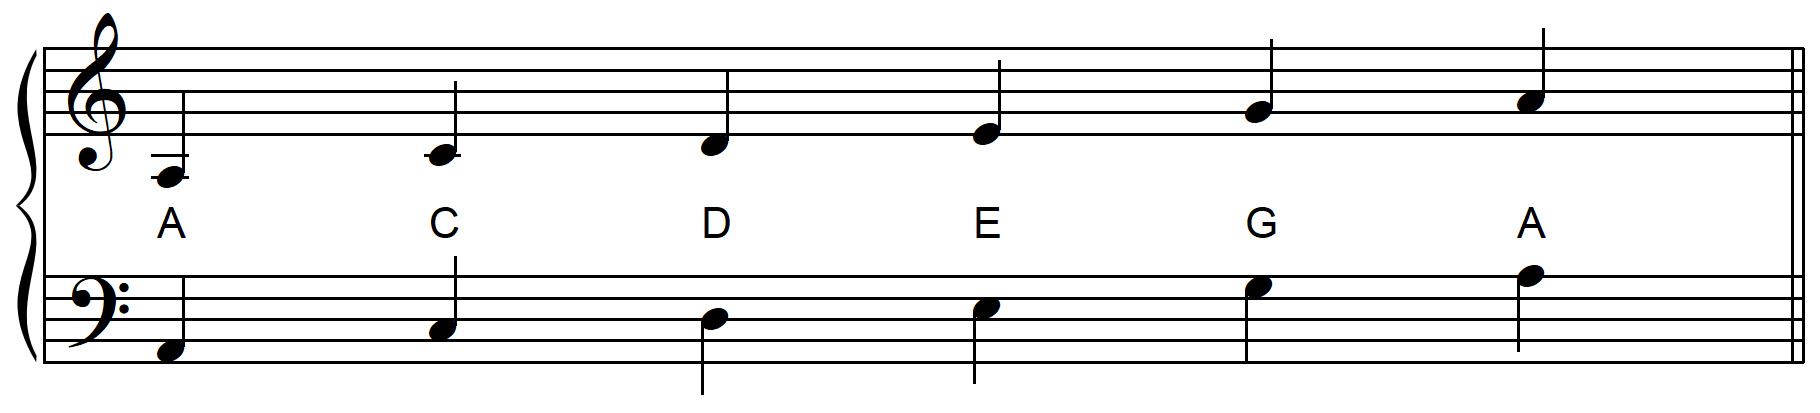 A minor pentatonic scale in staff notation